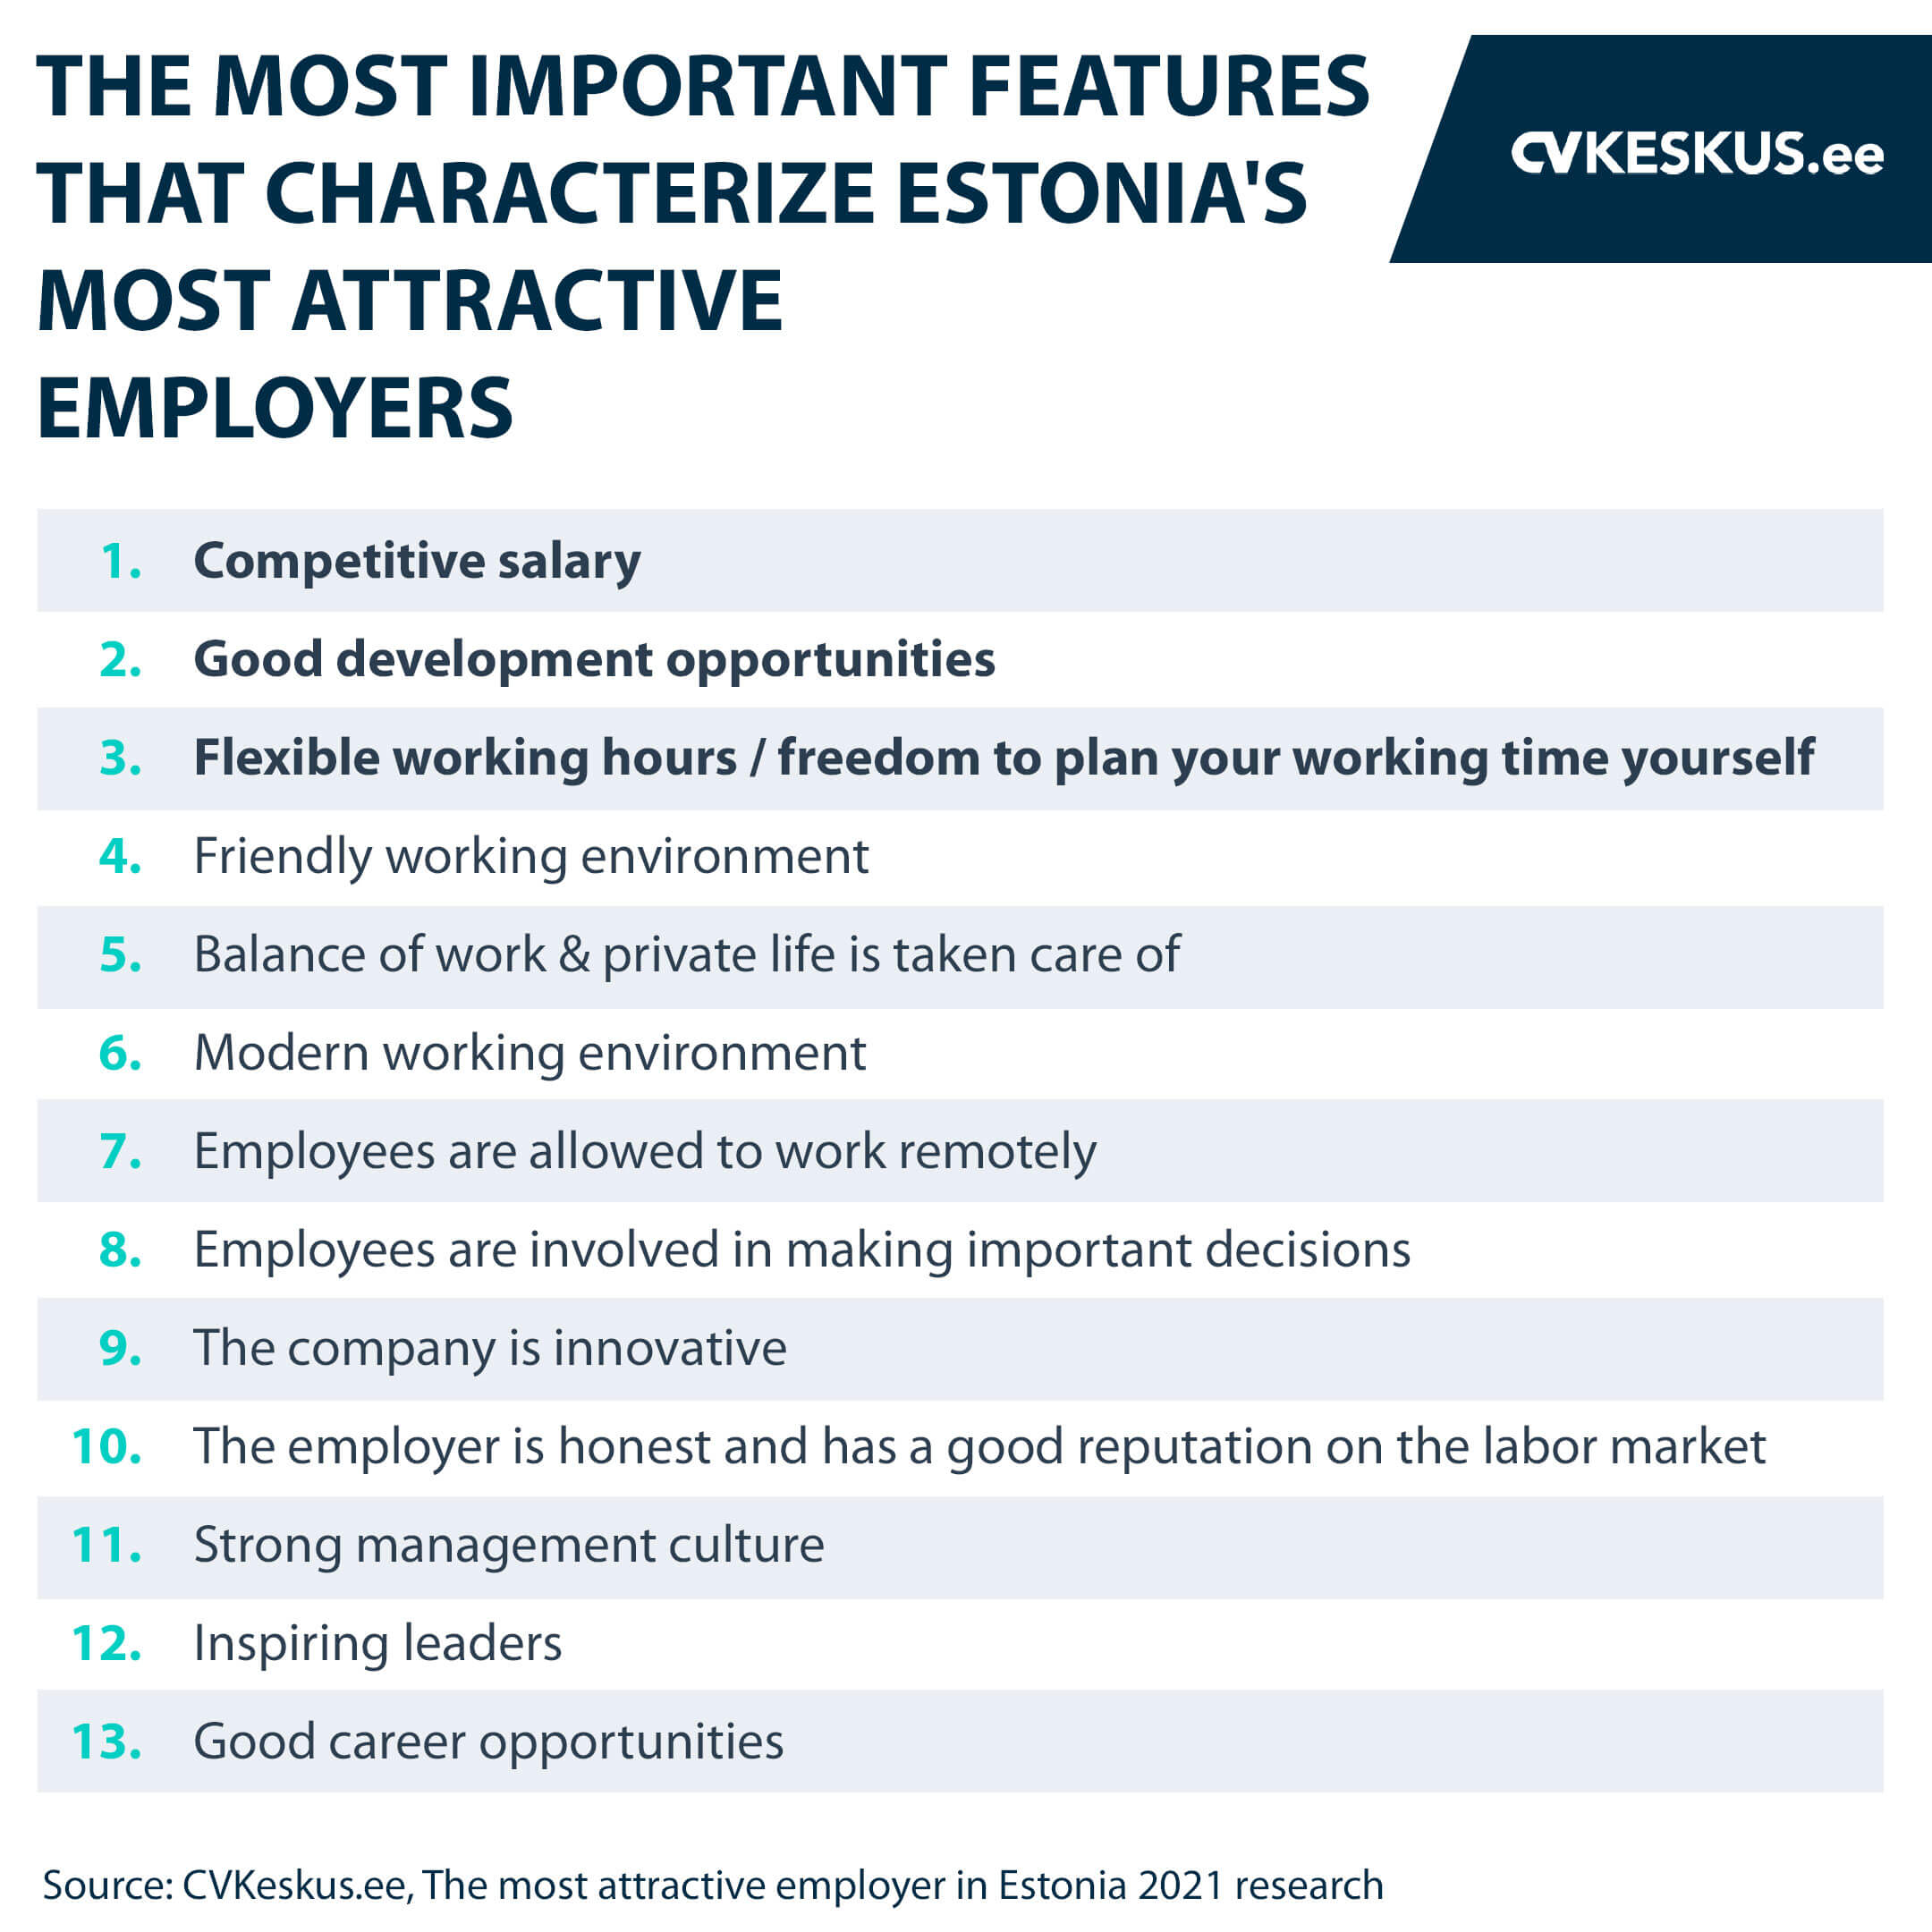 What makes a company an attractive employer to work for?